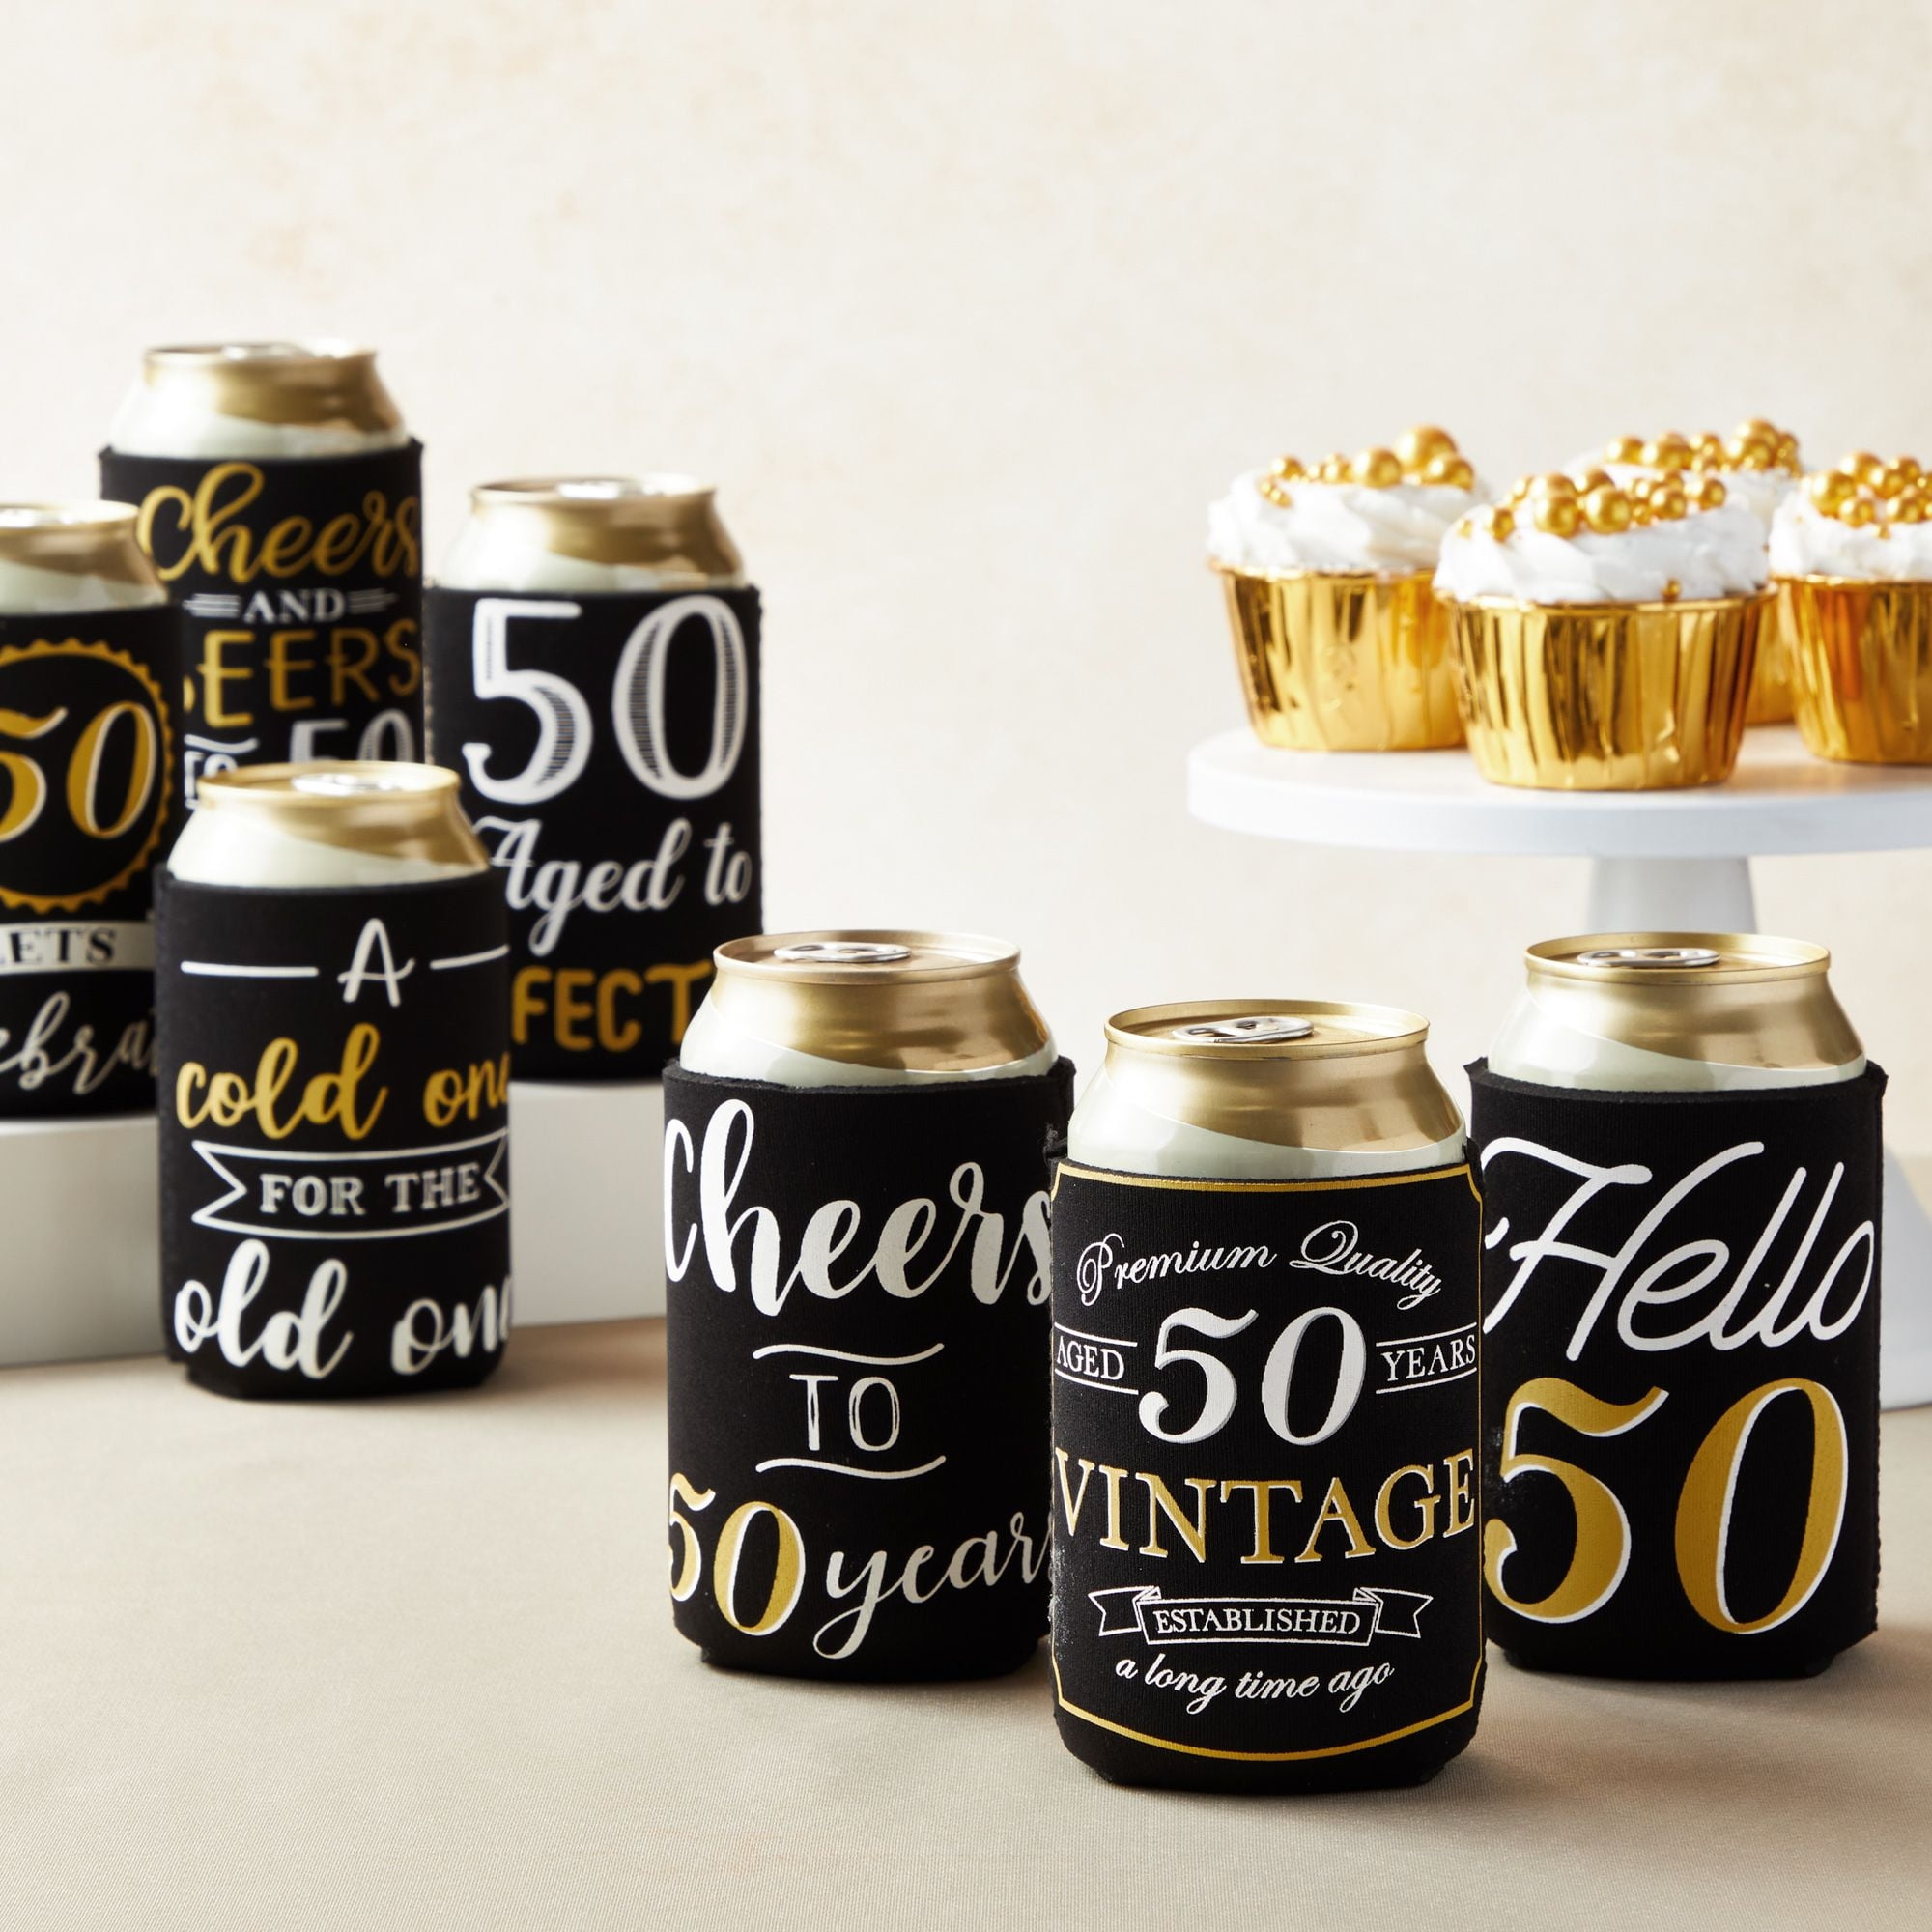 Old Balls Club 50th Birthday Full Color Slim Can Coolers